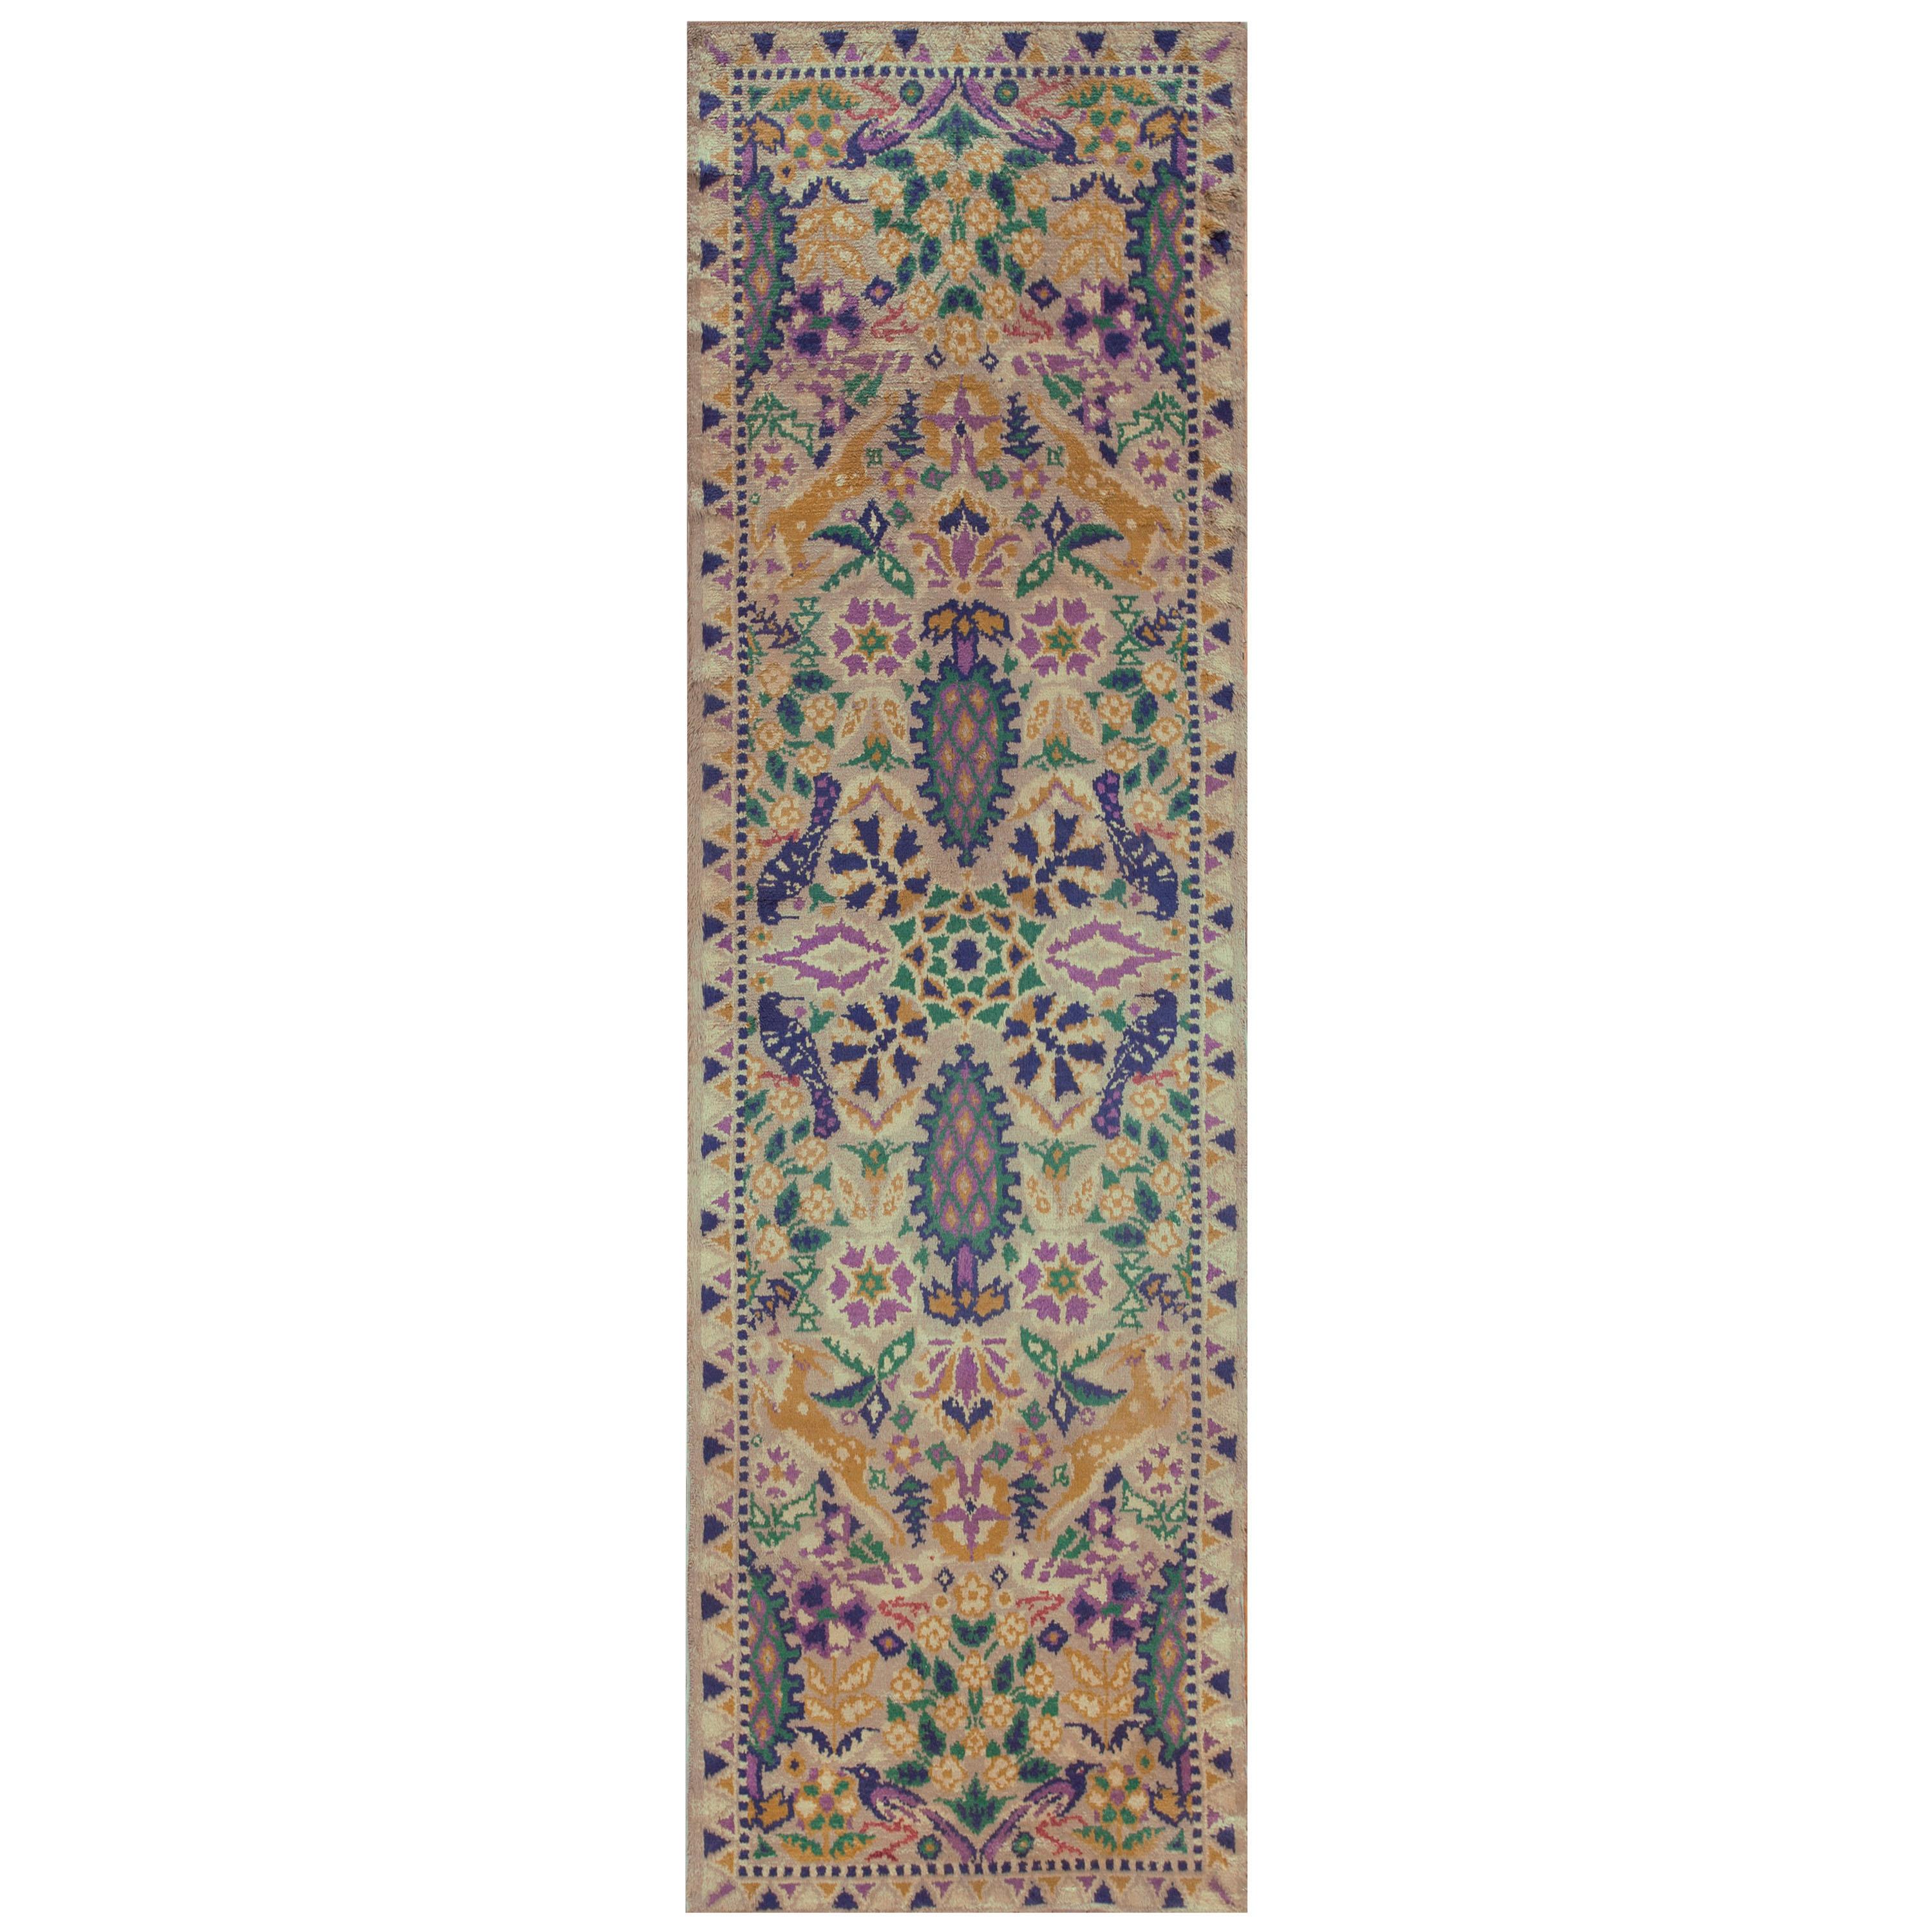 Early 20th Century Irish Donegal Arts & Crafts Carpet (3'6" x 11'2" -107 x 341 ) For Sale